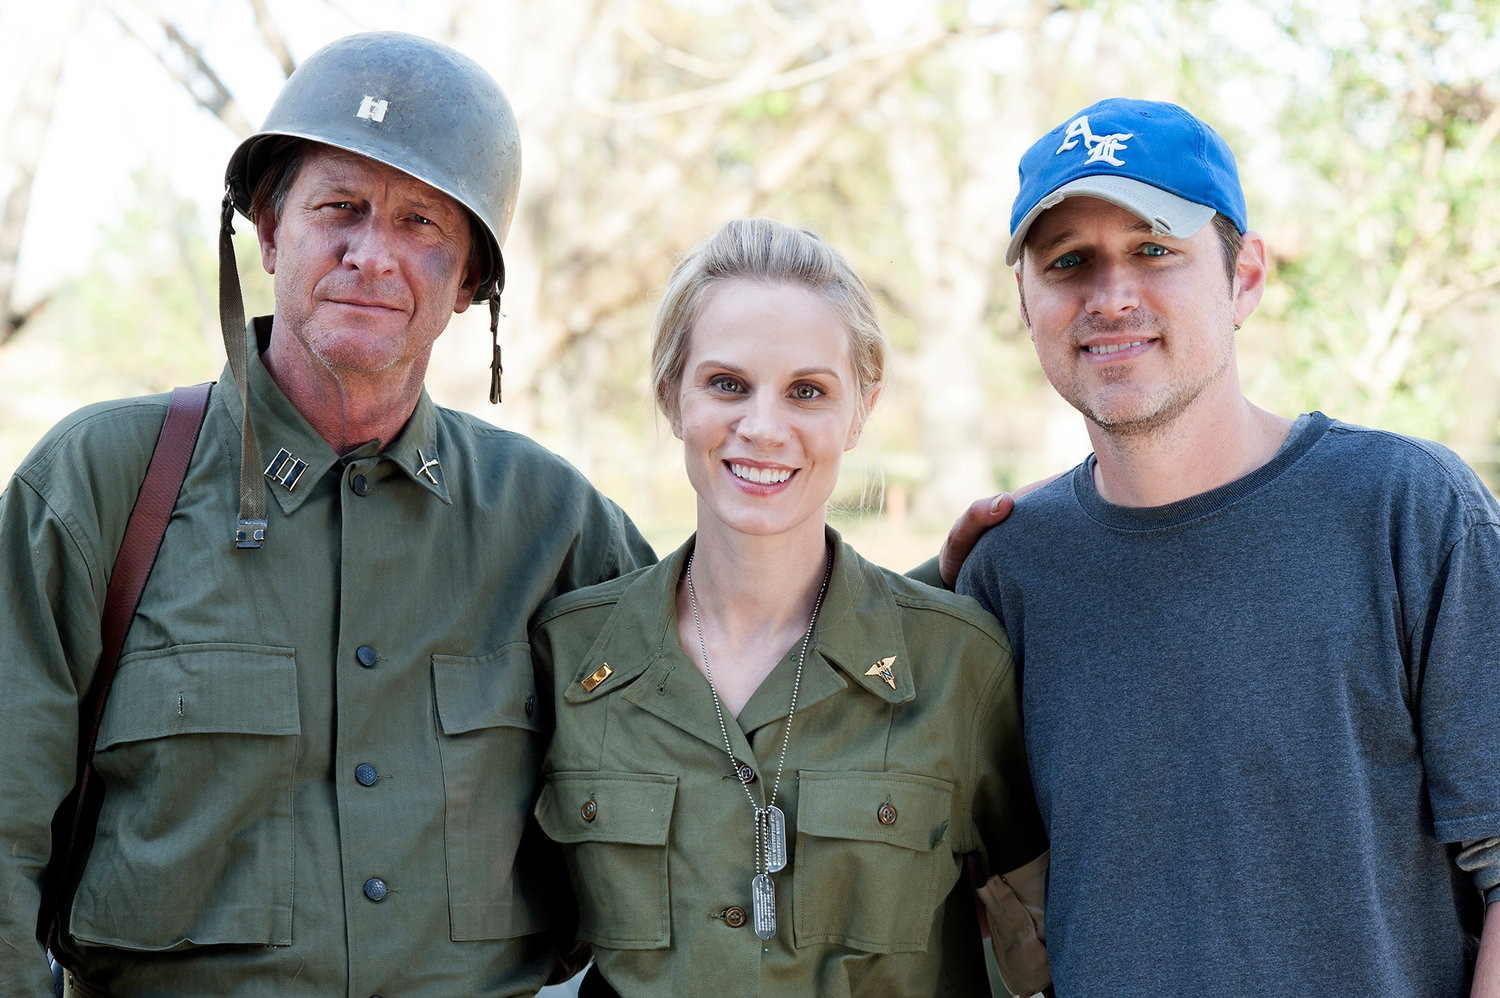 Eric Colley, right, and his wife, Hallie Shepherd, pose with actor Brett Cullen on the set of “The Last Rescue,” a film focused on events of World War II.